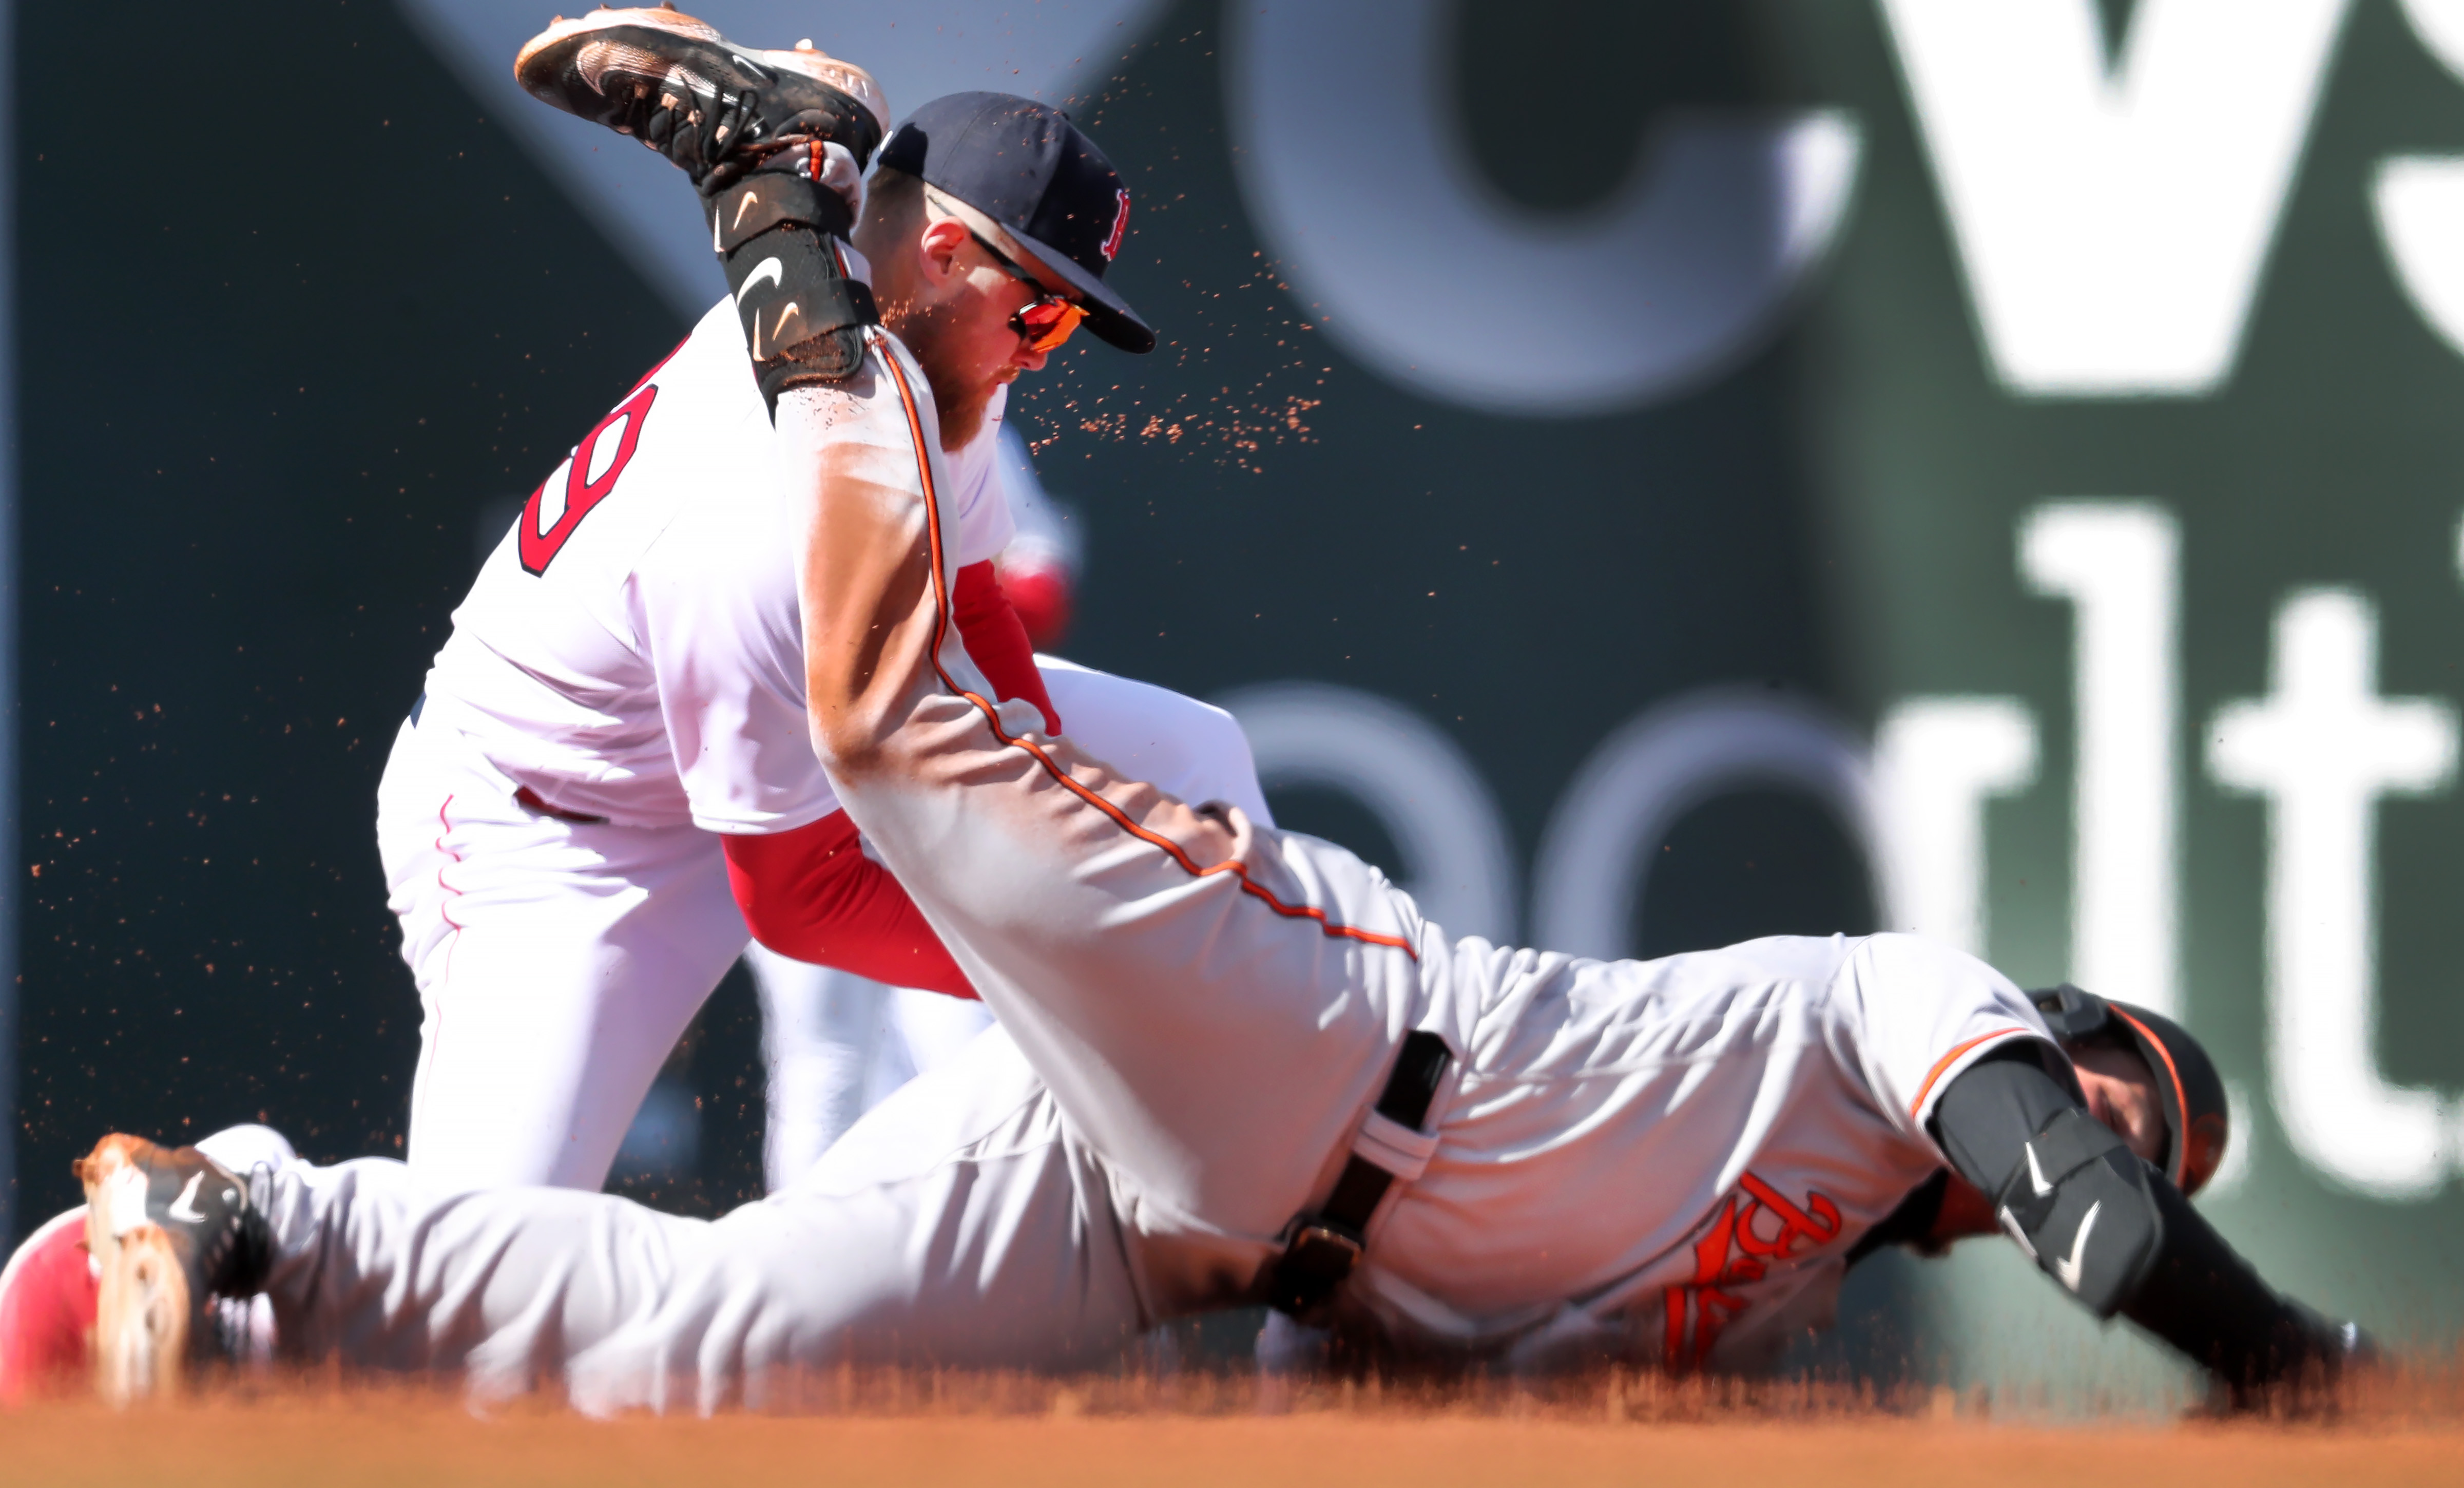 The Orioles stole a win with aggressive baserunning as the Red Sox